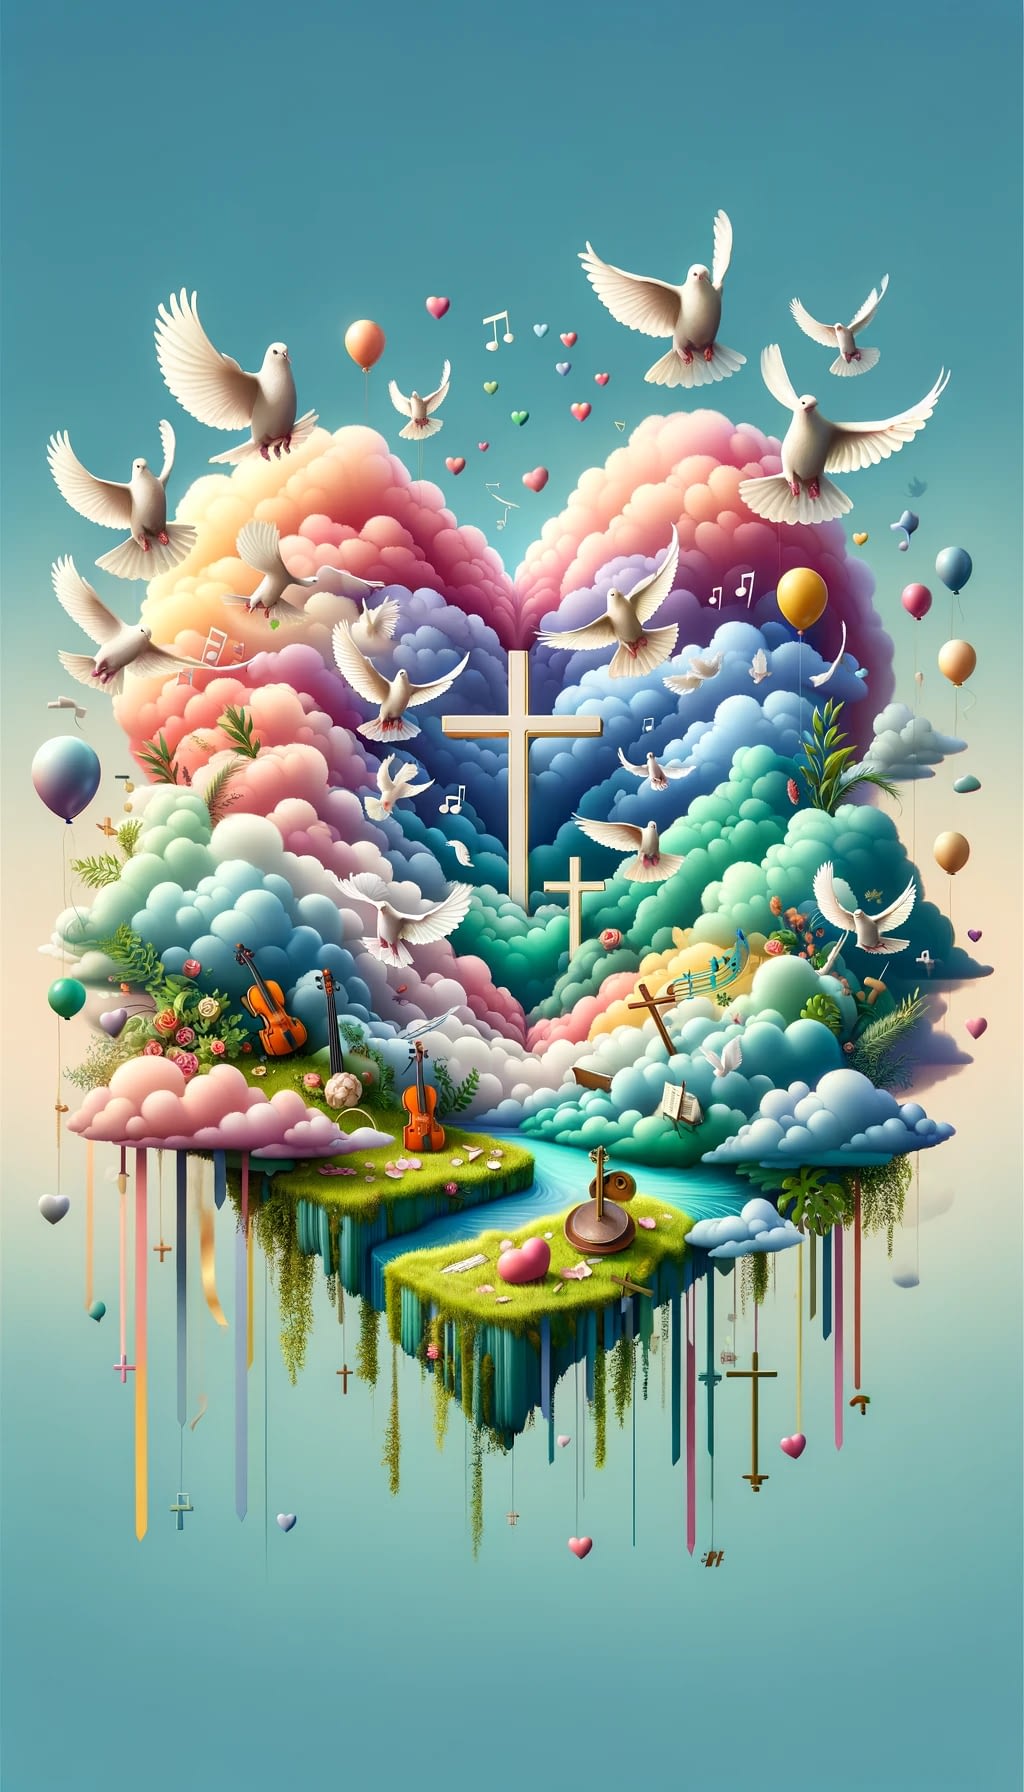 Dall&Middot;E 2024 02 23 11.09.17 Refining The Serene And Vibrant Scene This Iteration Focuses On A Harmonious Integration Of Heart Shaped Pastel Colored Clouds With Christian Crosses -